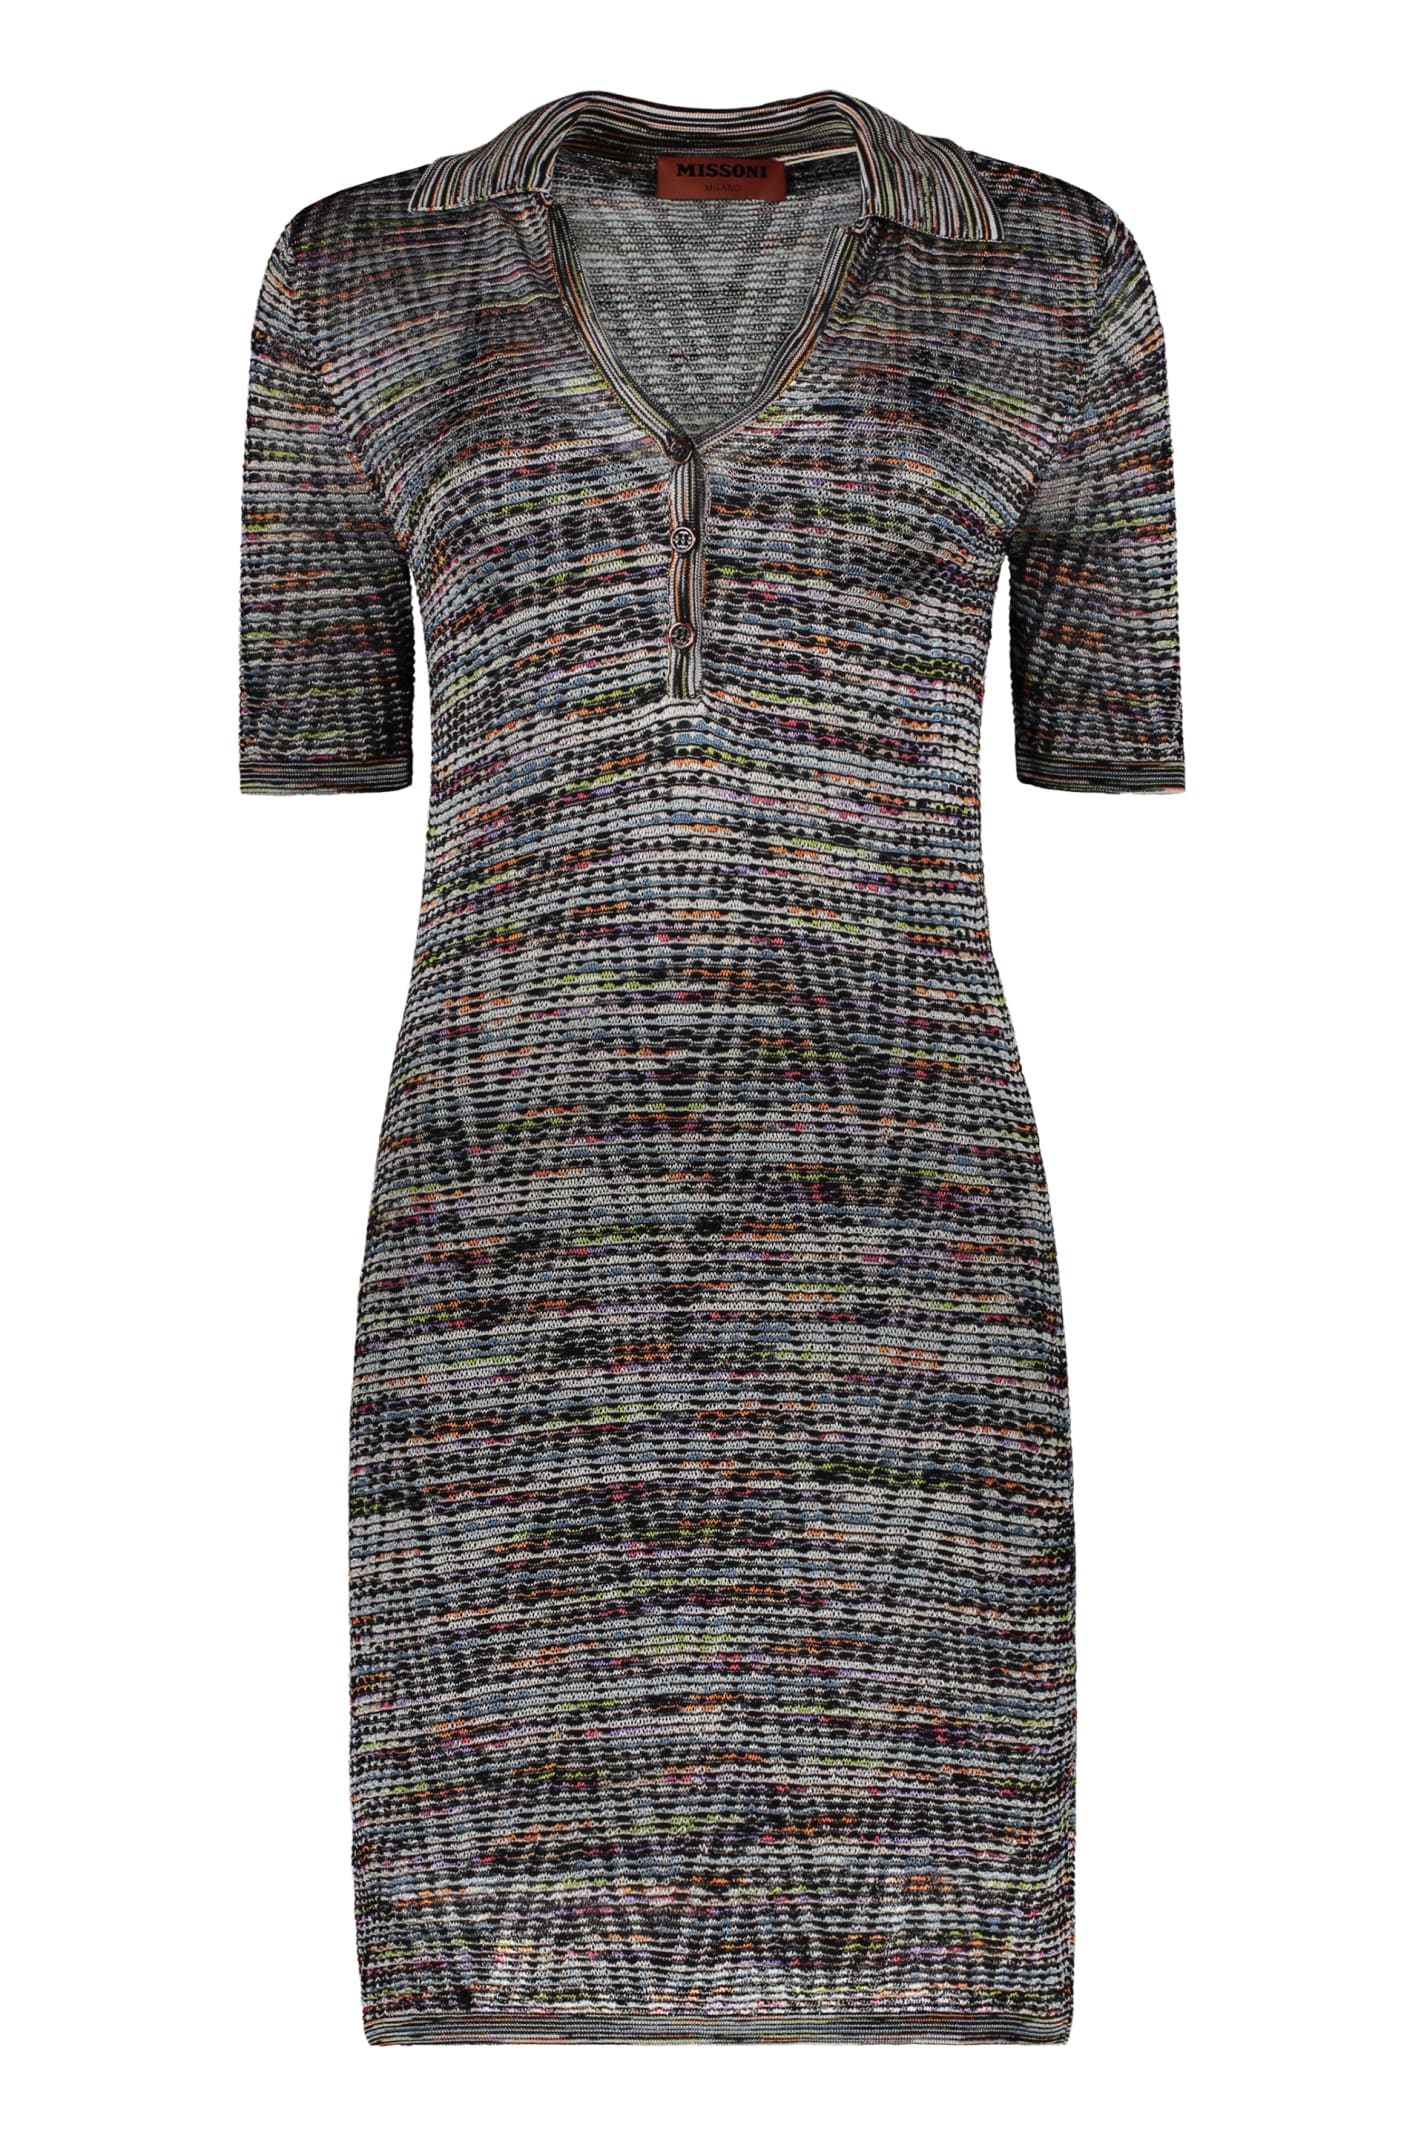 Missoni Knitted Dress In Black